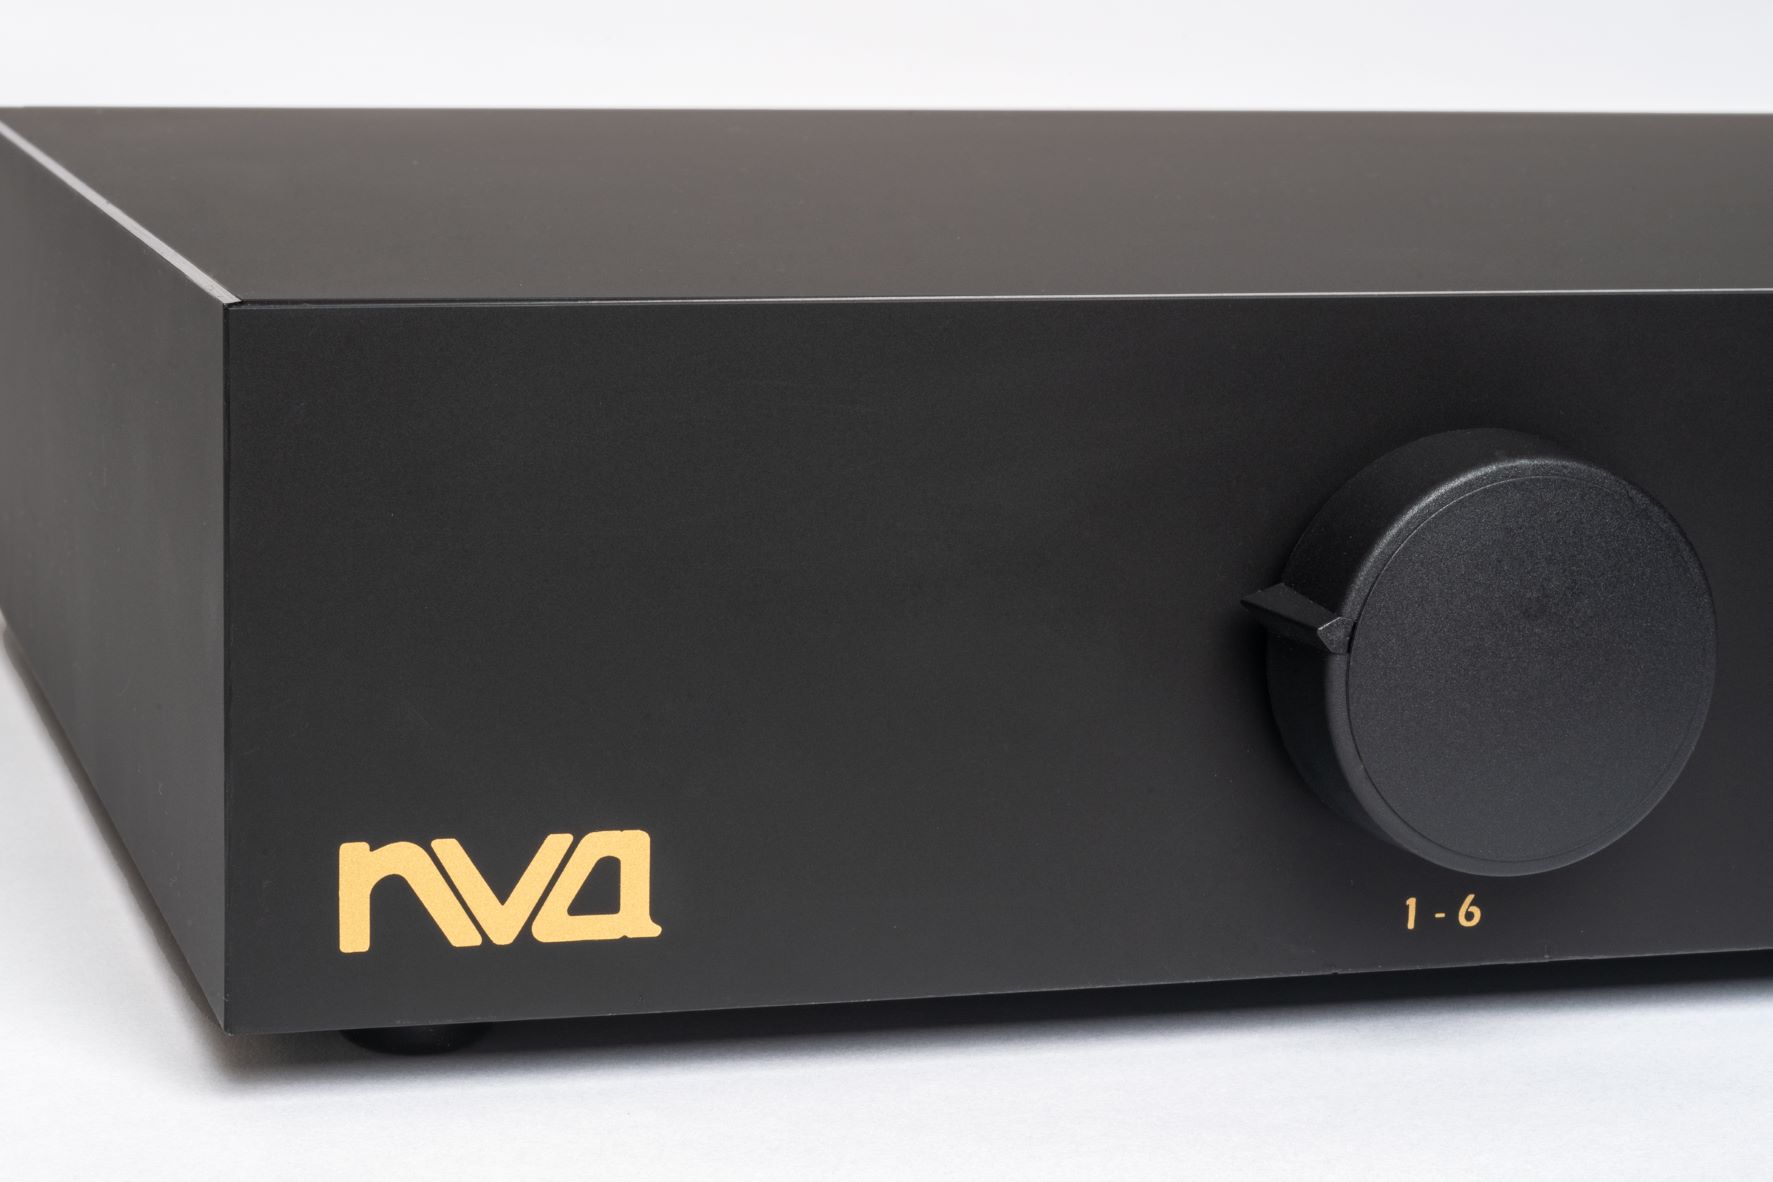 The new NVA integrated amplifier